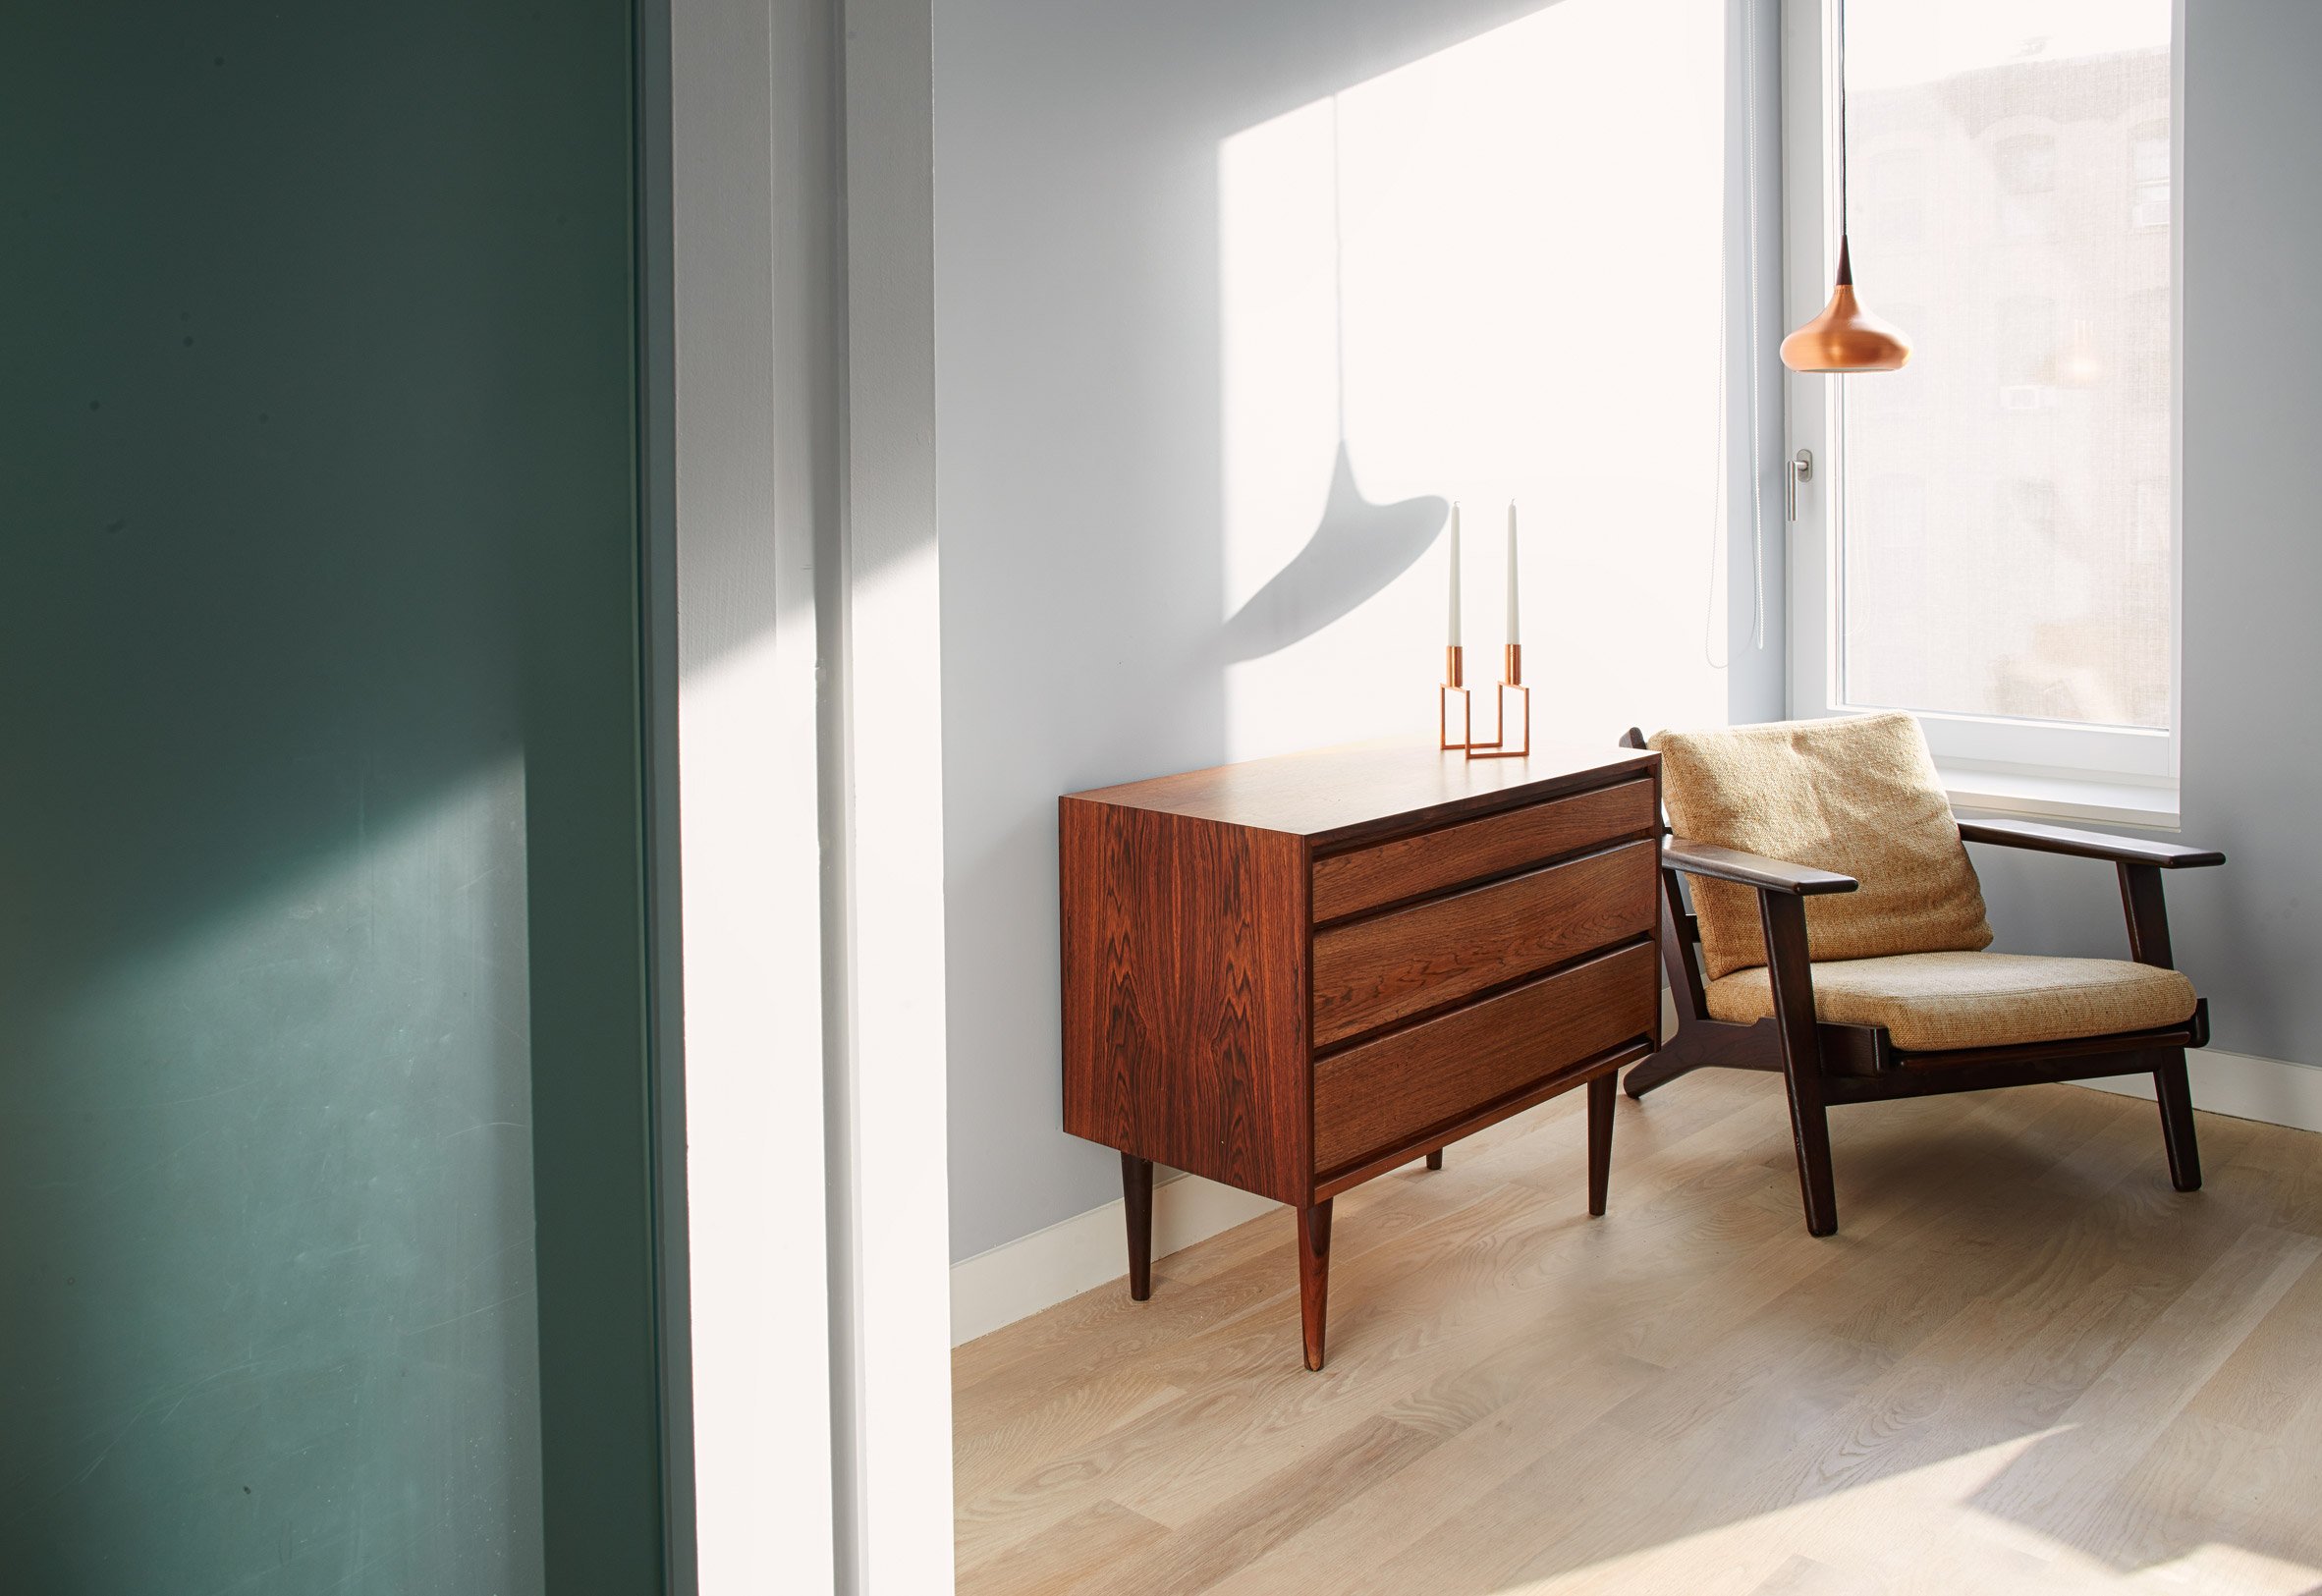 Brooklyn Passive House with Dutch furniture